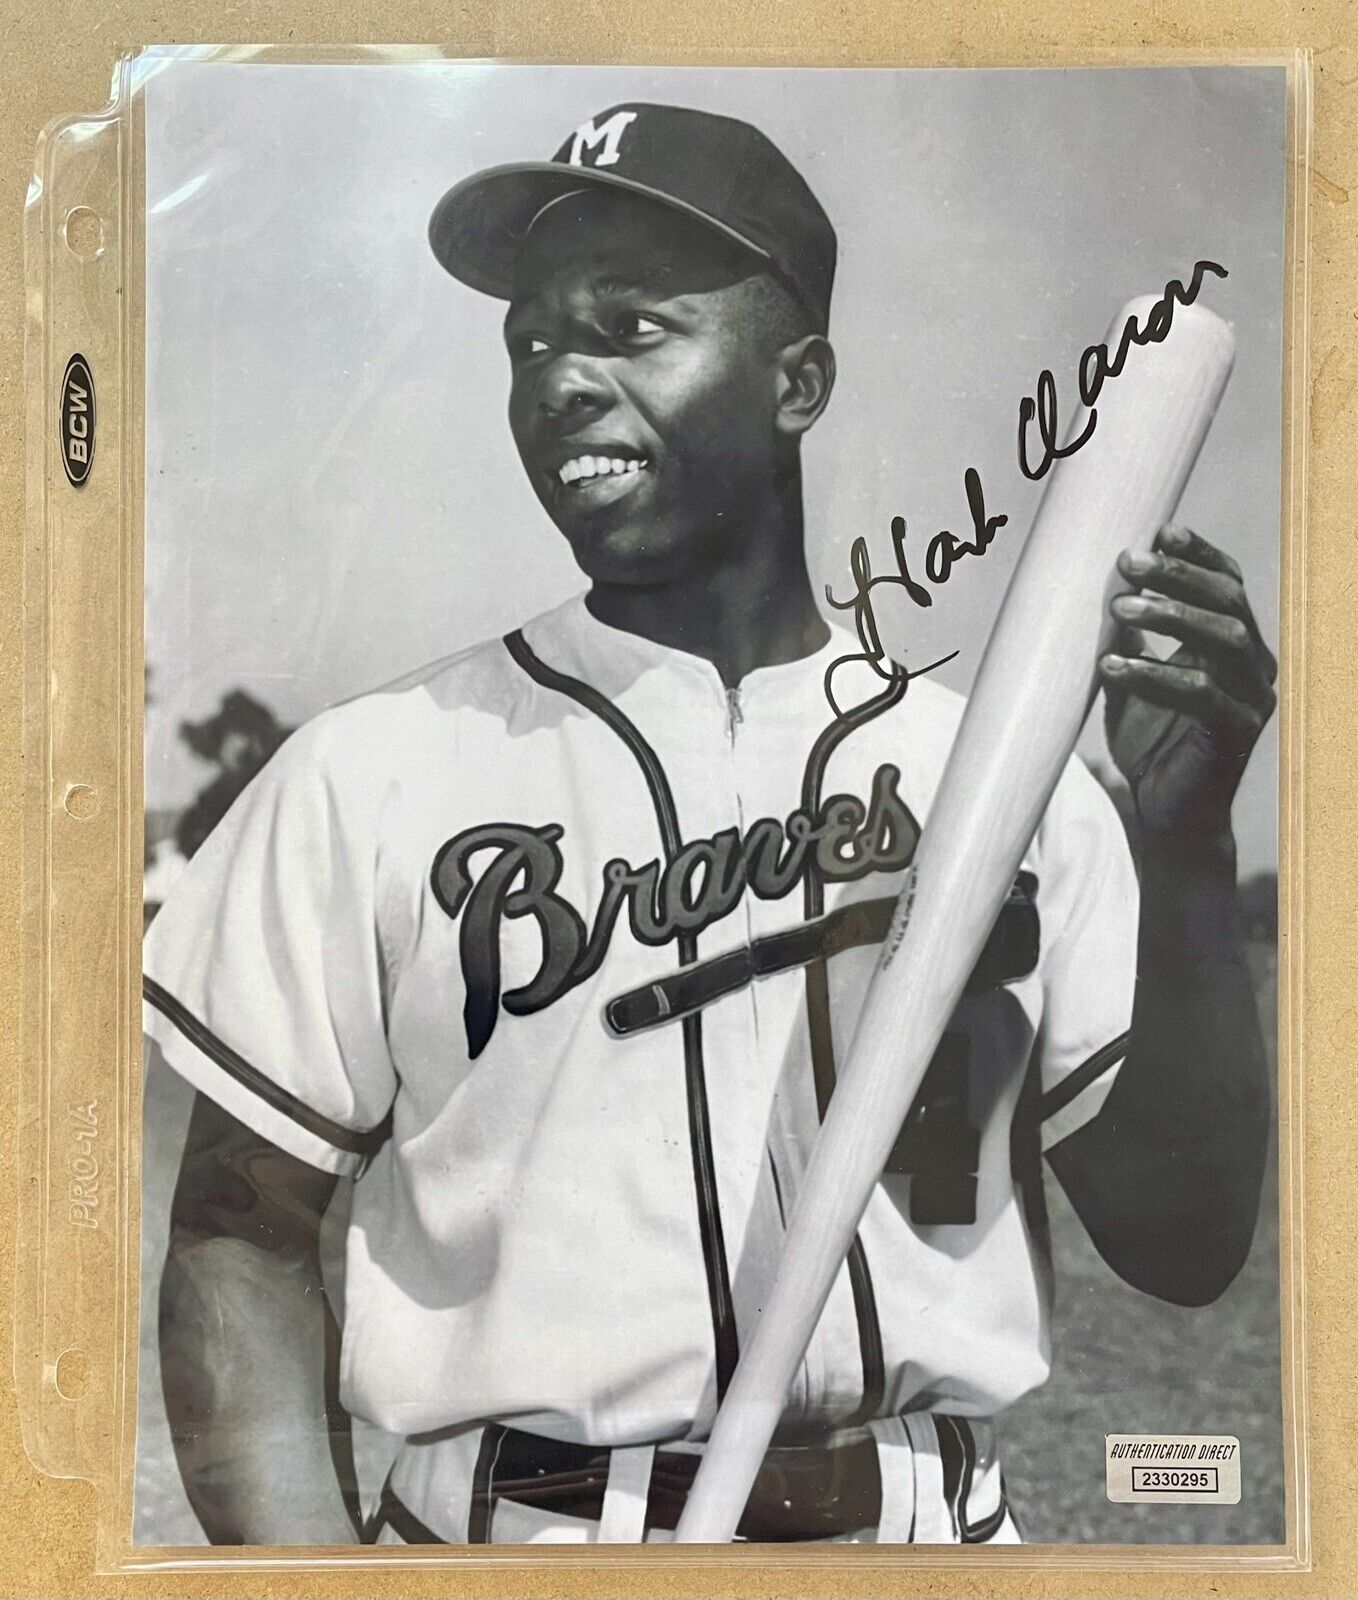 HANK AARON SIGNED 8.5 x 11” Glossy Photo BRAVES COA - Autograph Authenticated